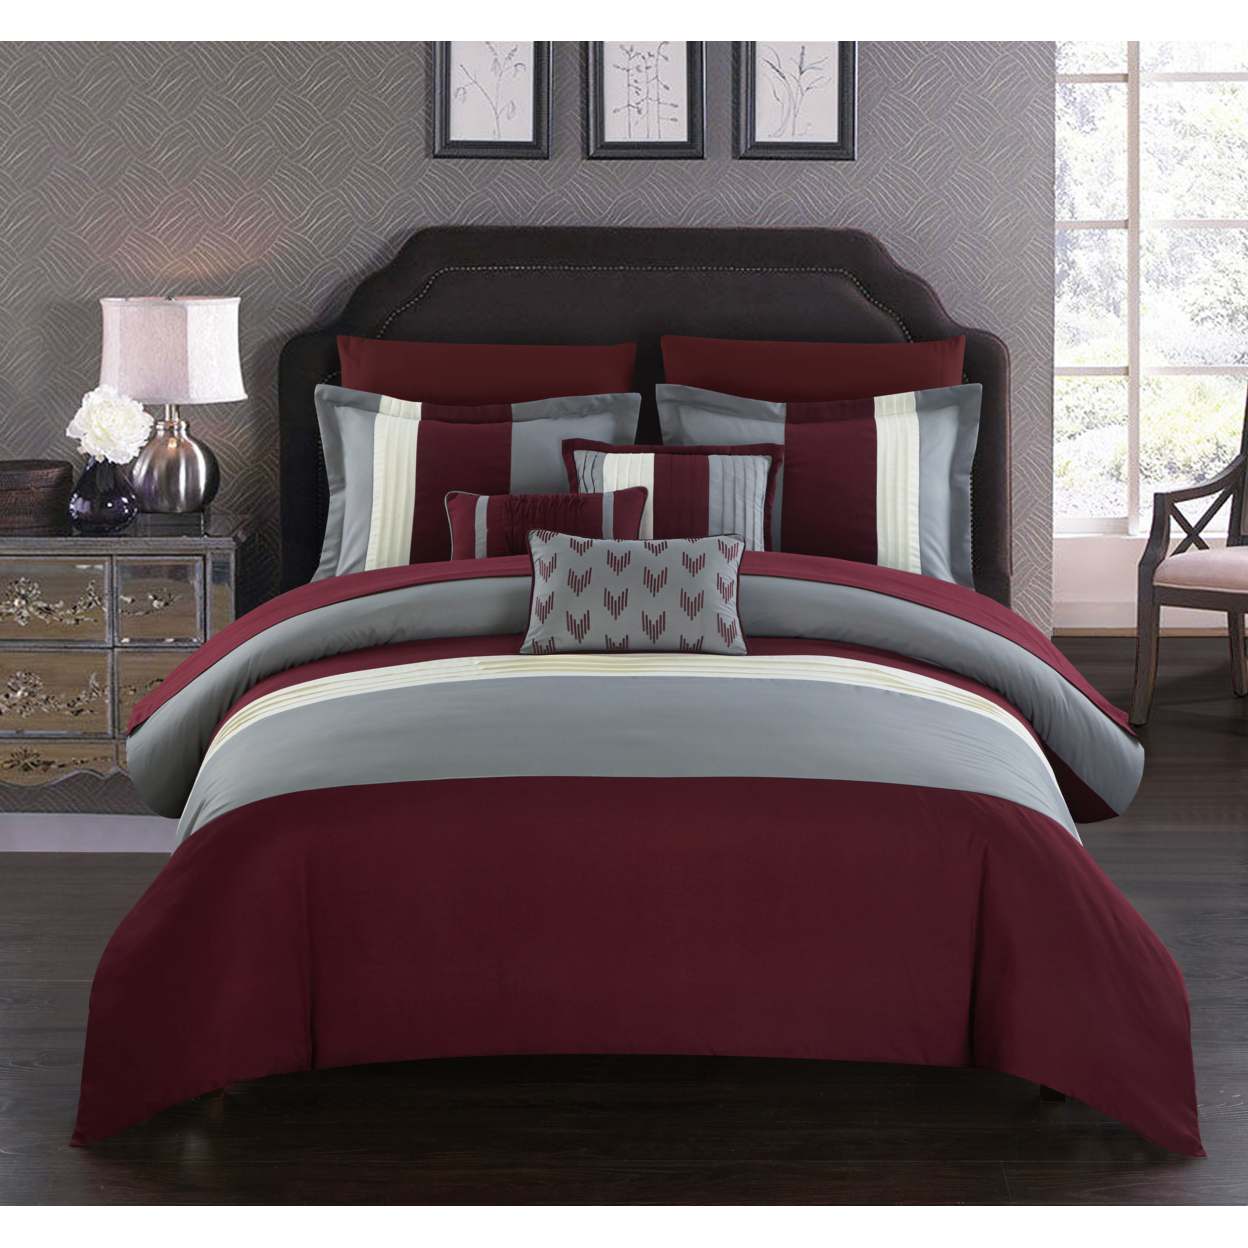 Rashi 10 Or 8 Piece Color Block Bed In A Bag Bedding And Comforter Set - Burgundy, Twin